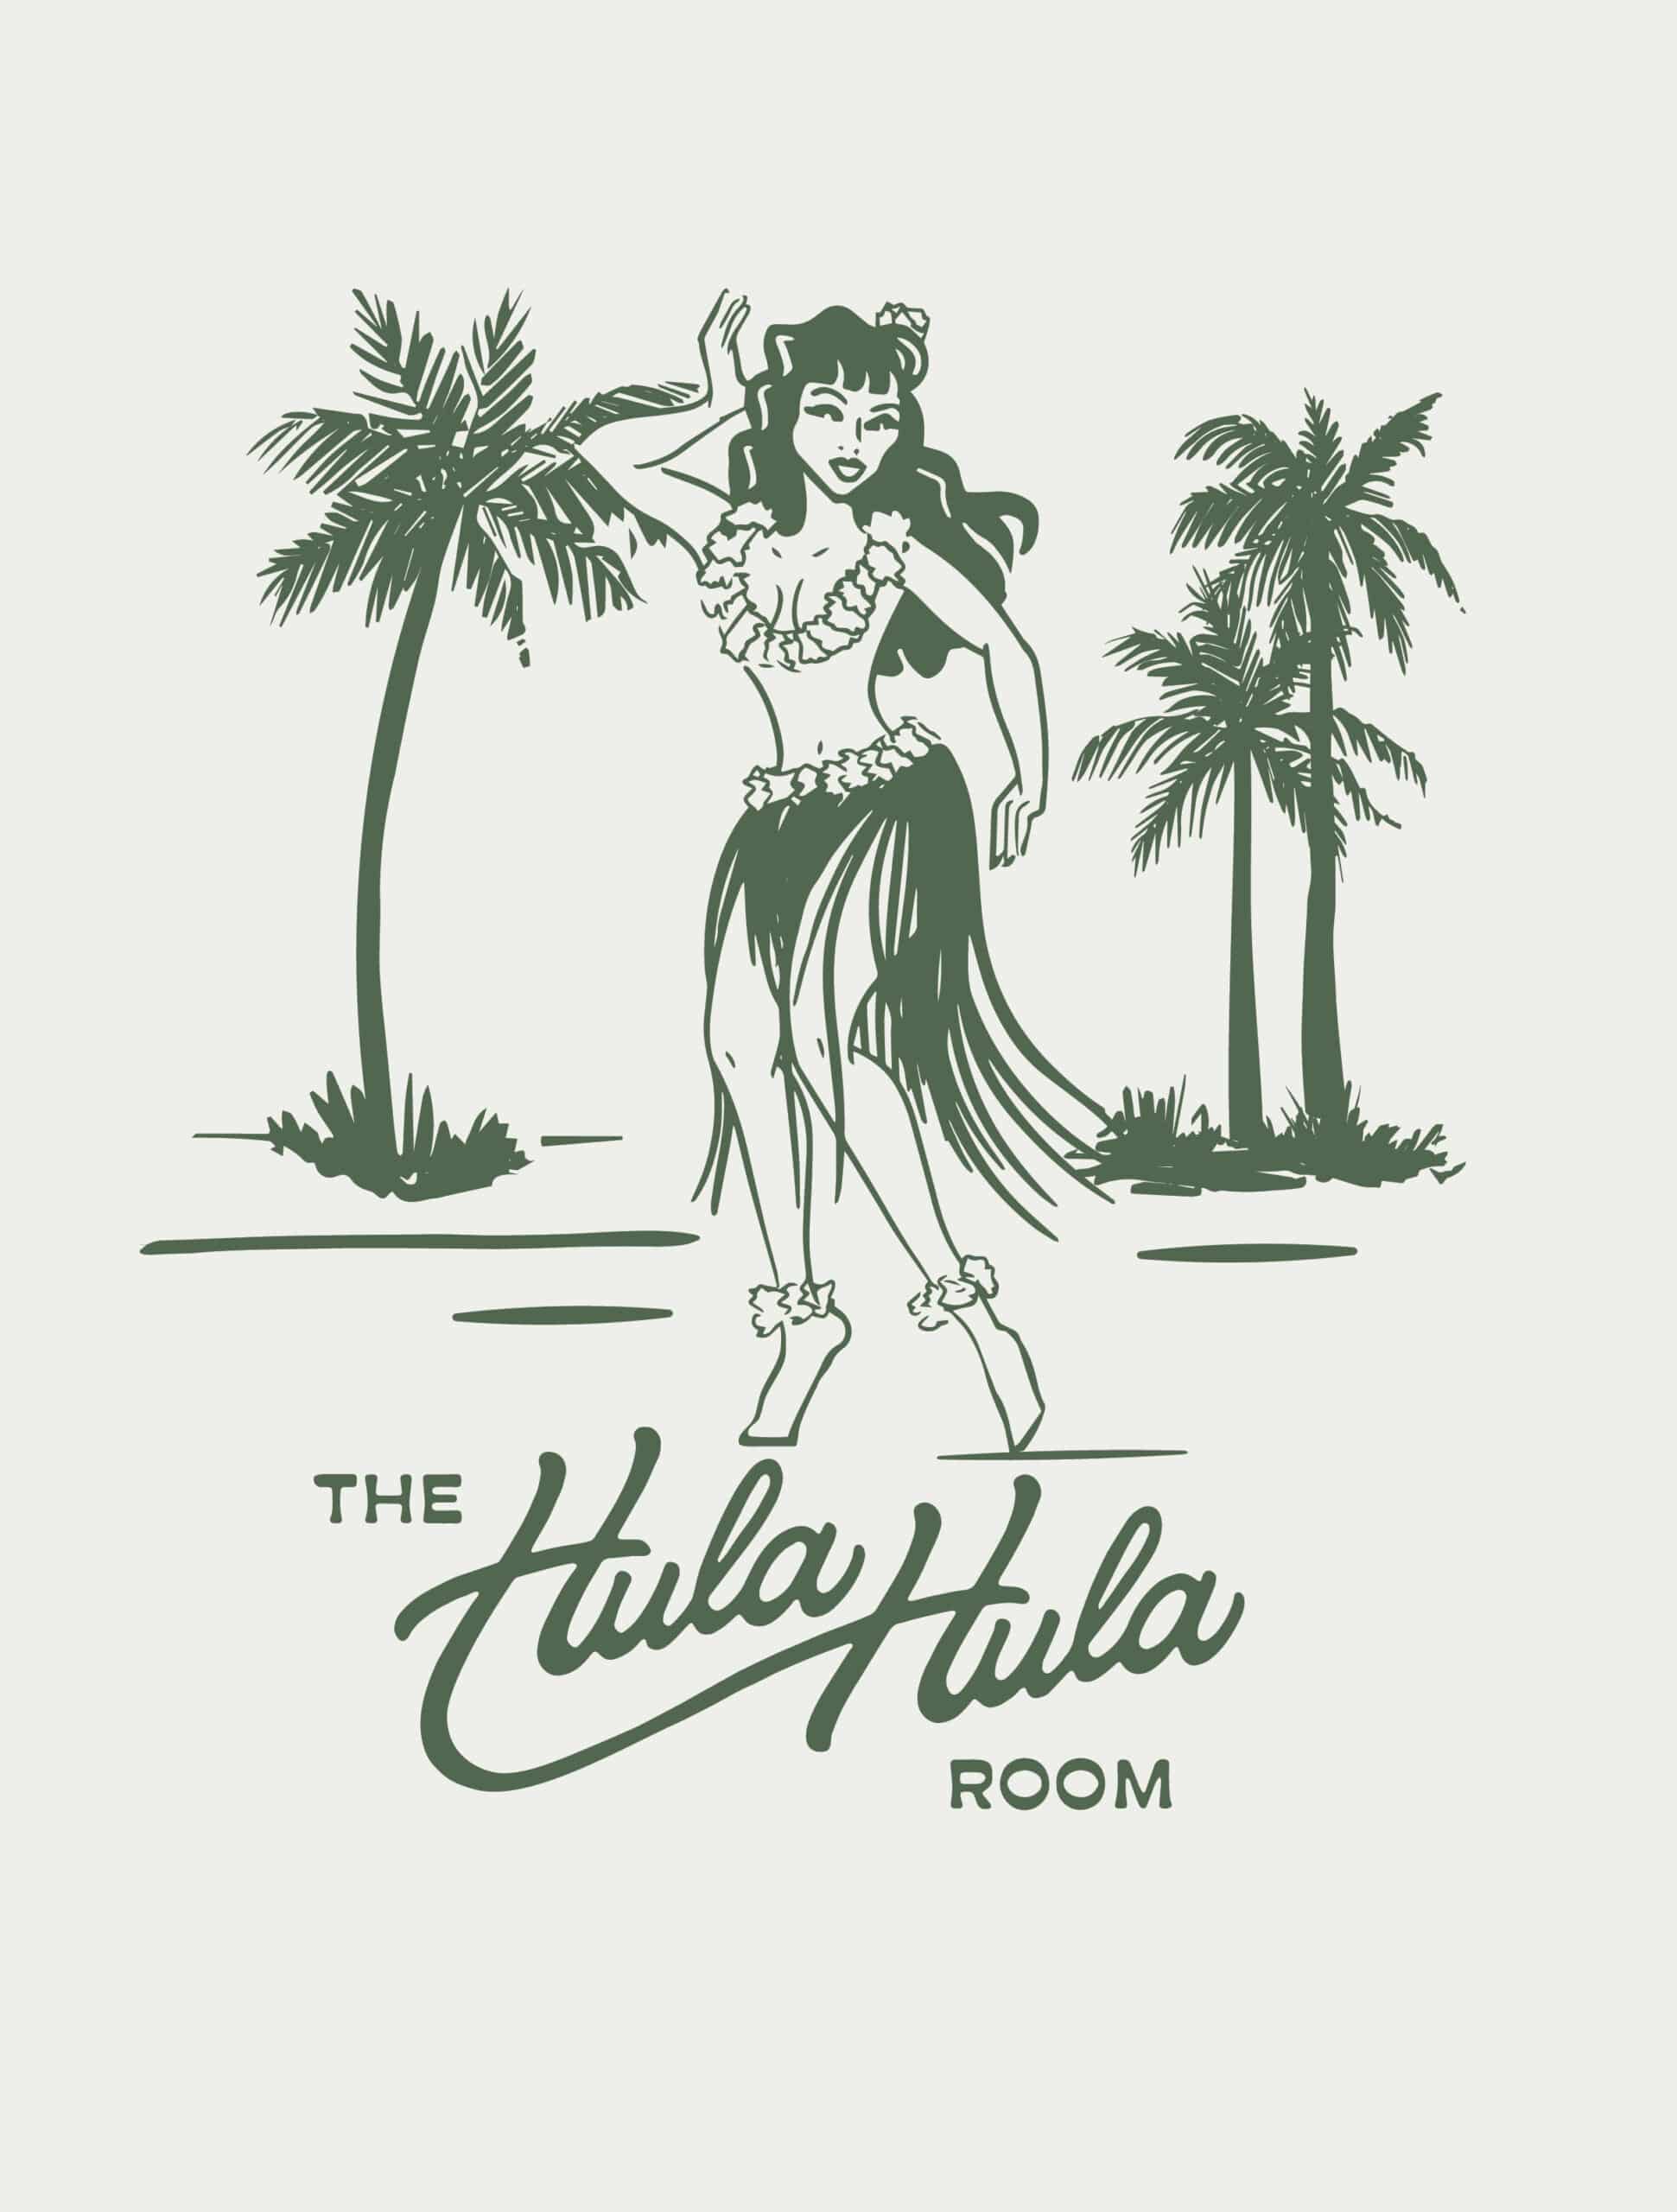 graphic for The Hula Hula Room Tiki Bar in Torrance California designed by Stellen Design logo design and branding agency in Los Angeles California specializing in logo design for hospitality brands